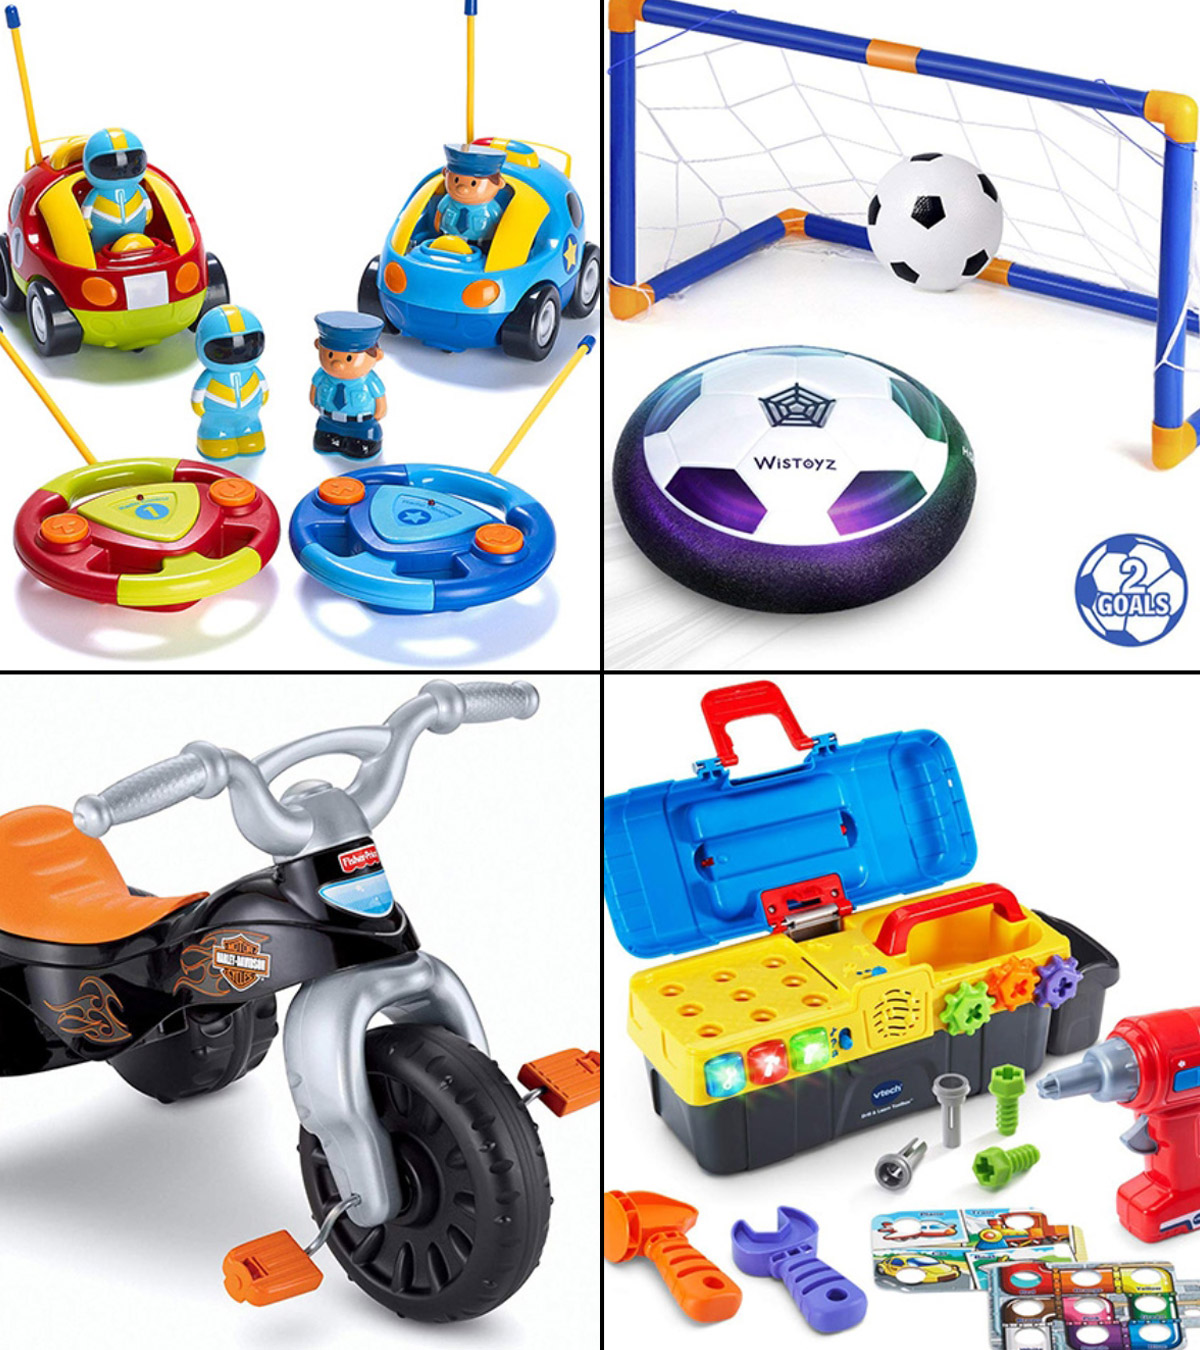 Gifts & Toys for 1.5, 2 and 3 Year Old Toddlers